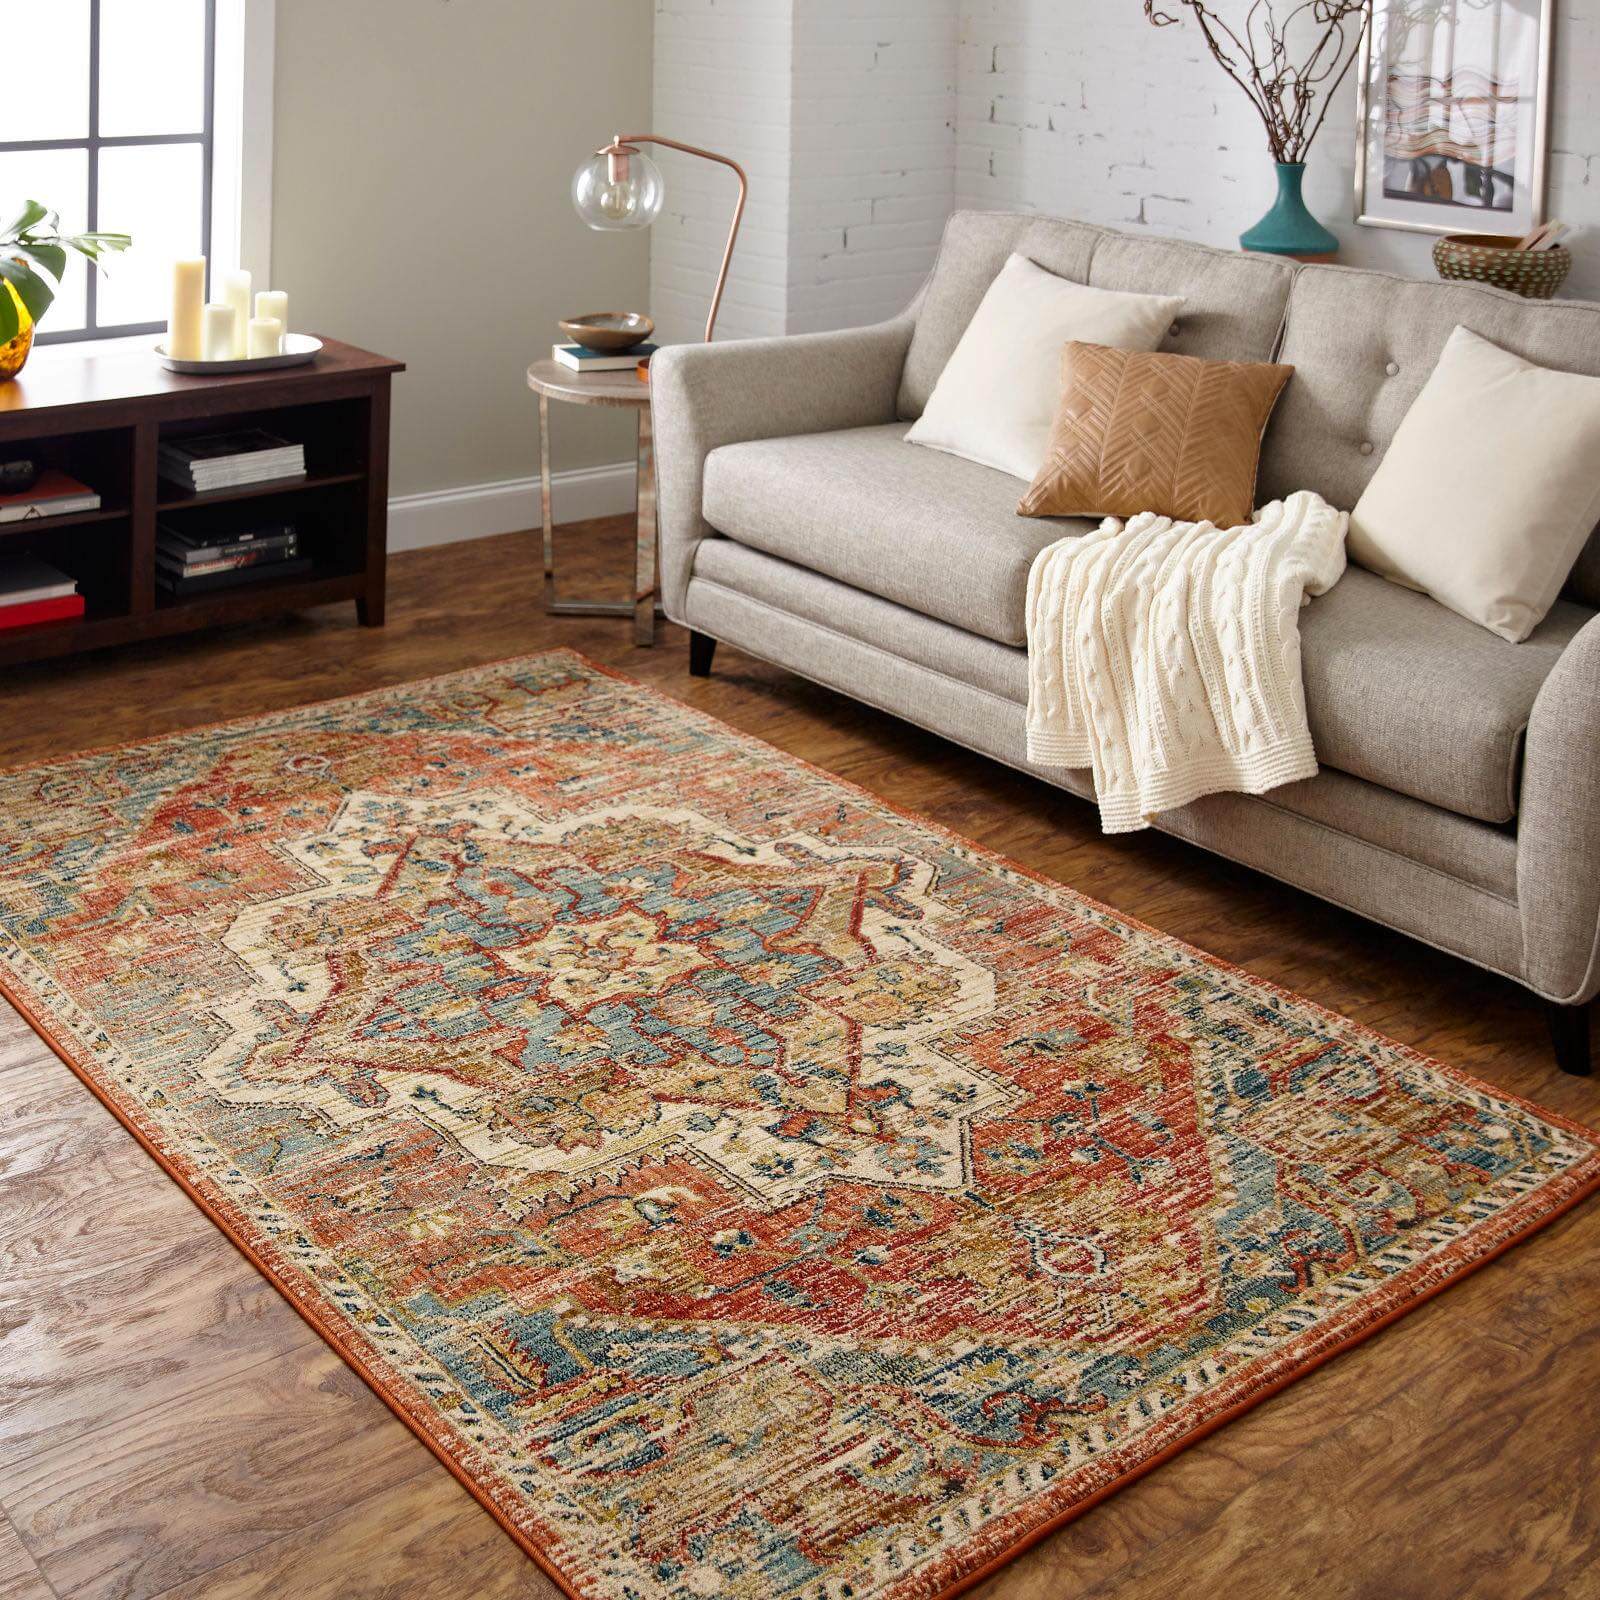 Title Retailer Companyname In, Country Rugs For Living Room